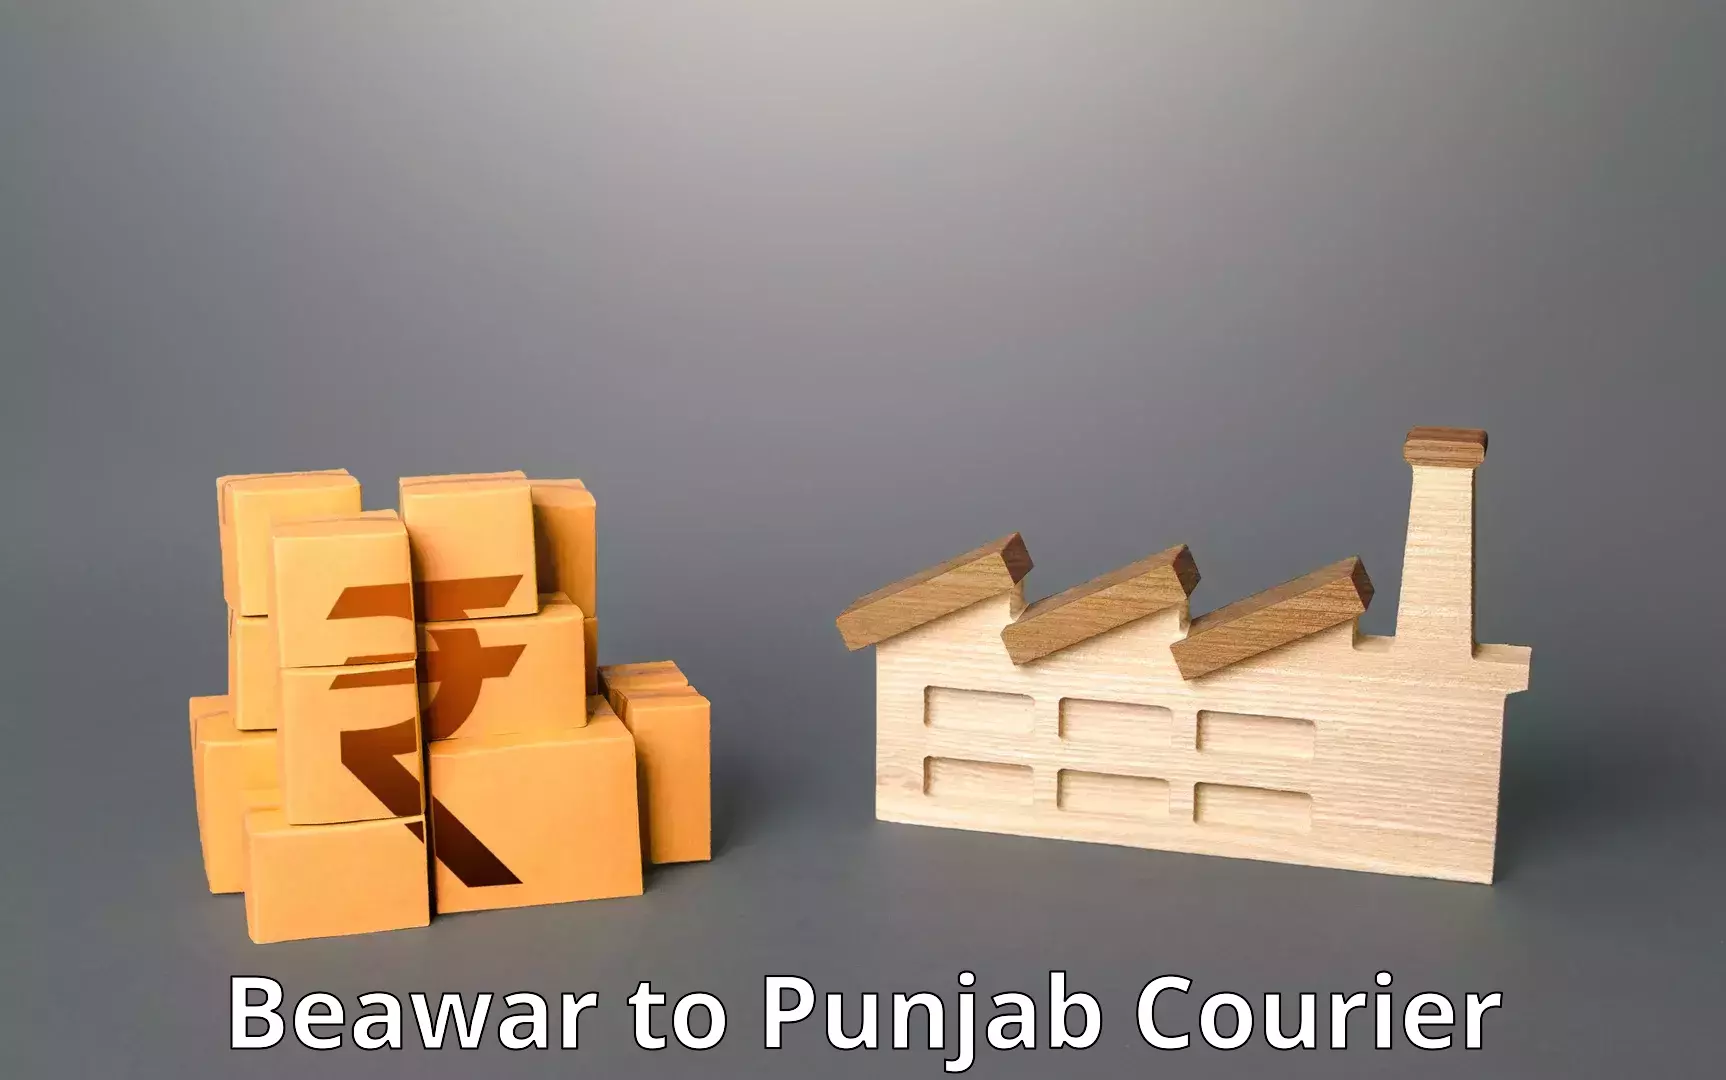 Express courier capabilities in Beawar to Ropar